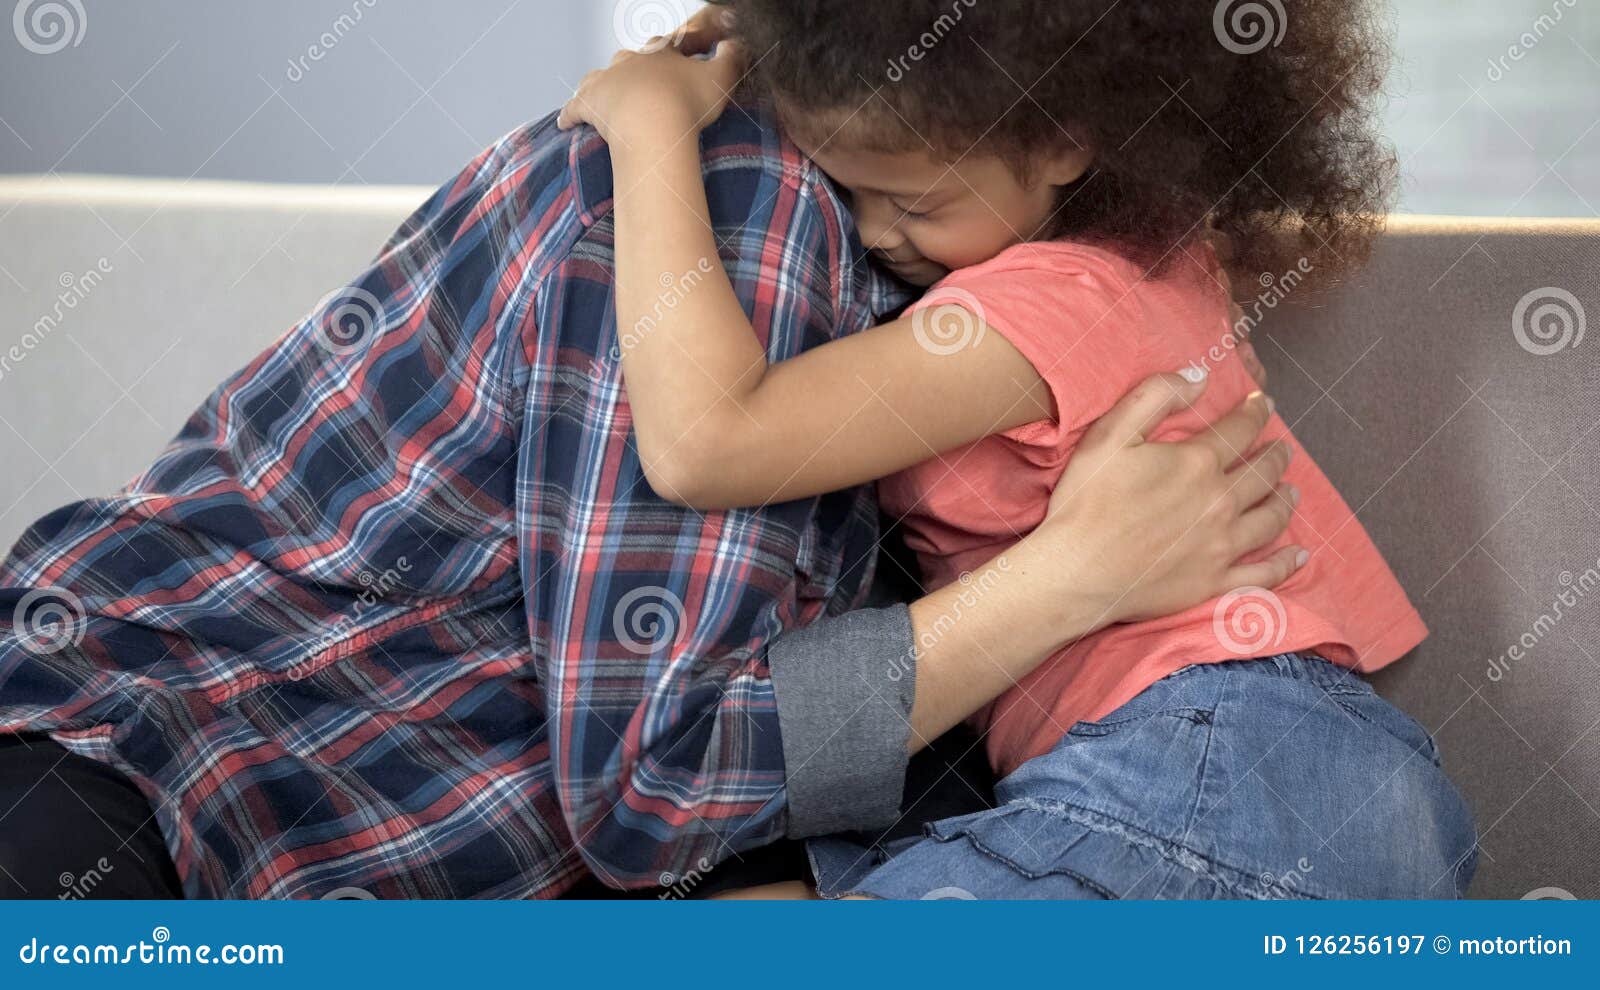 caring adult lady hugging little girl, child adoption system, family happiness